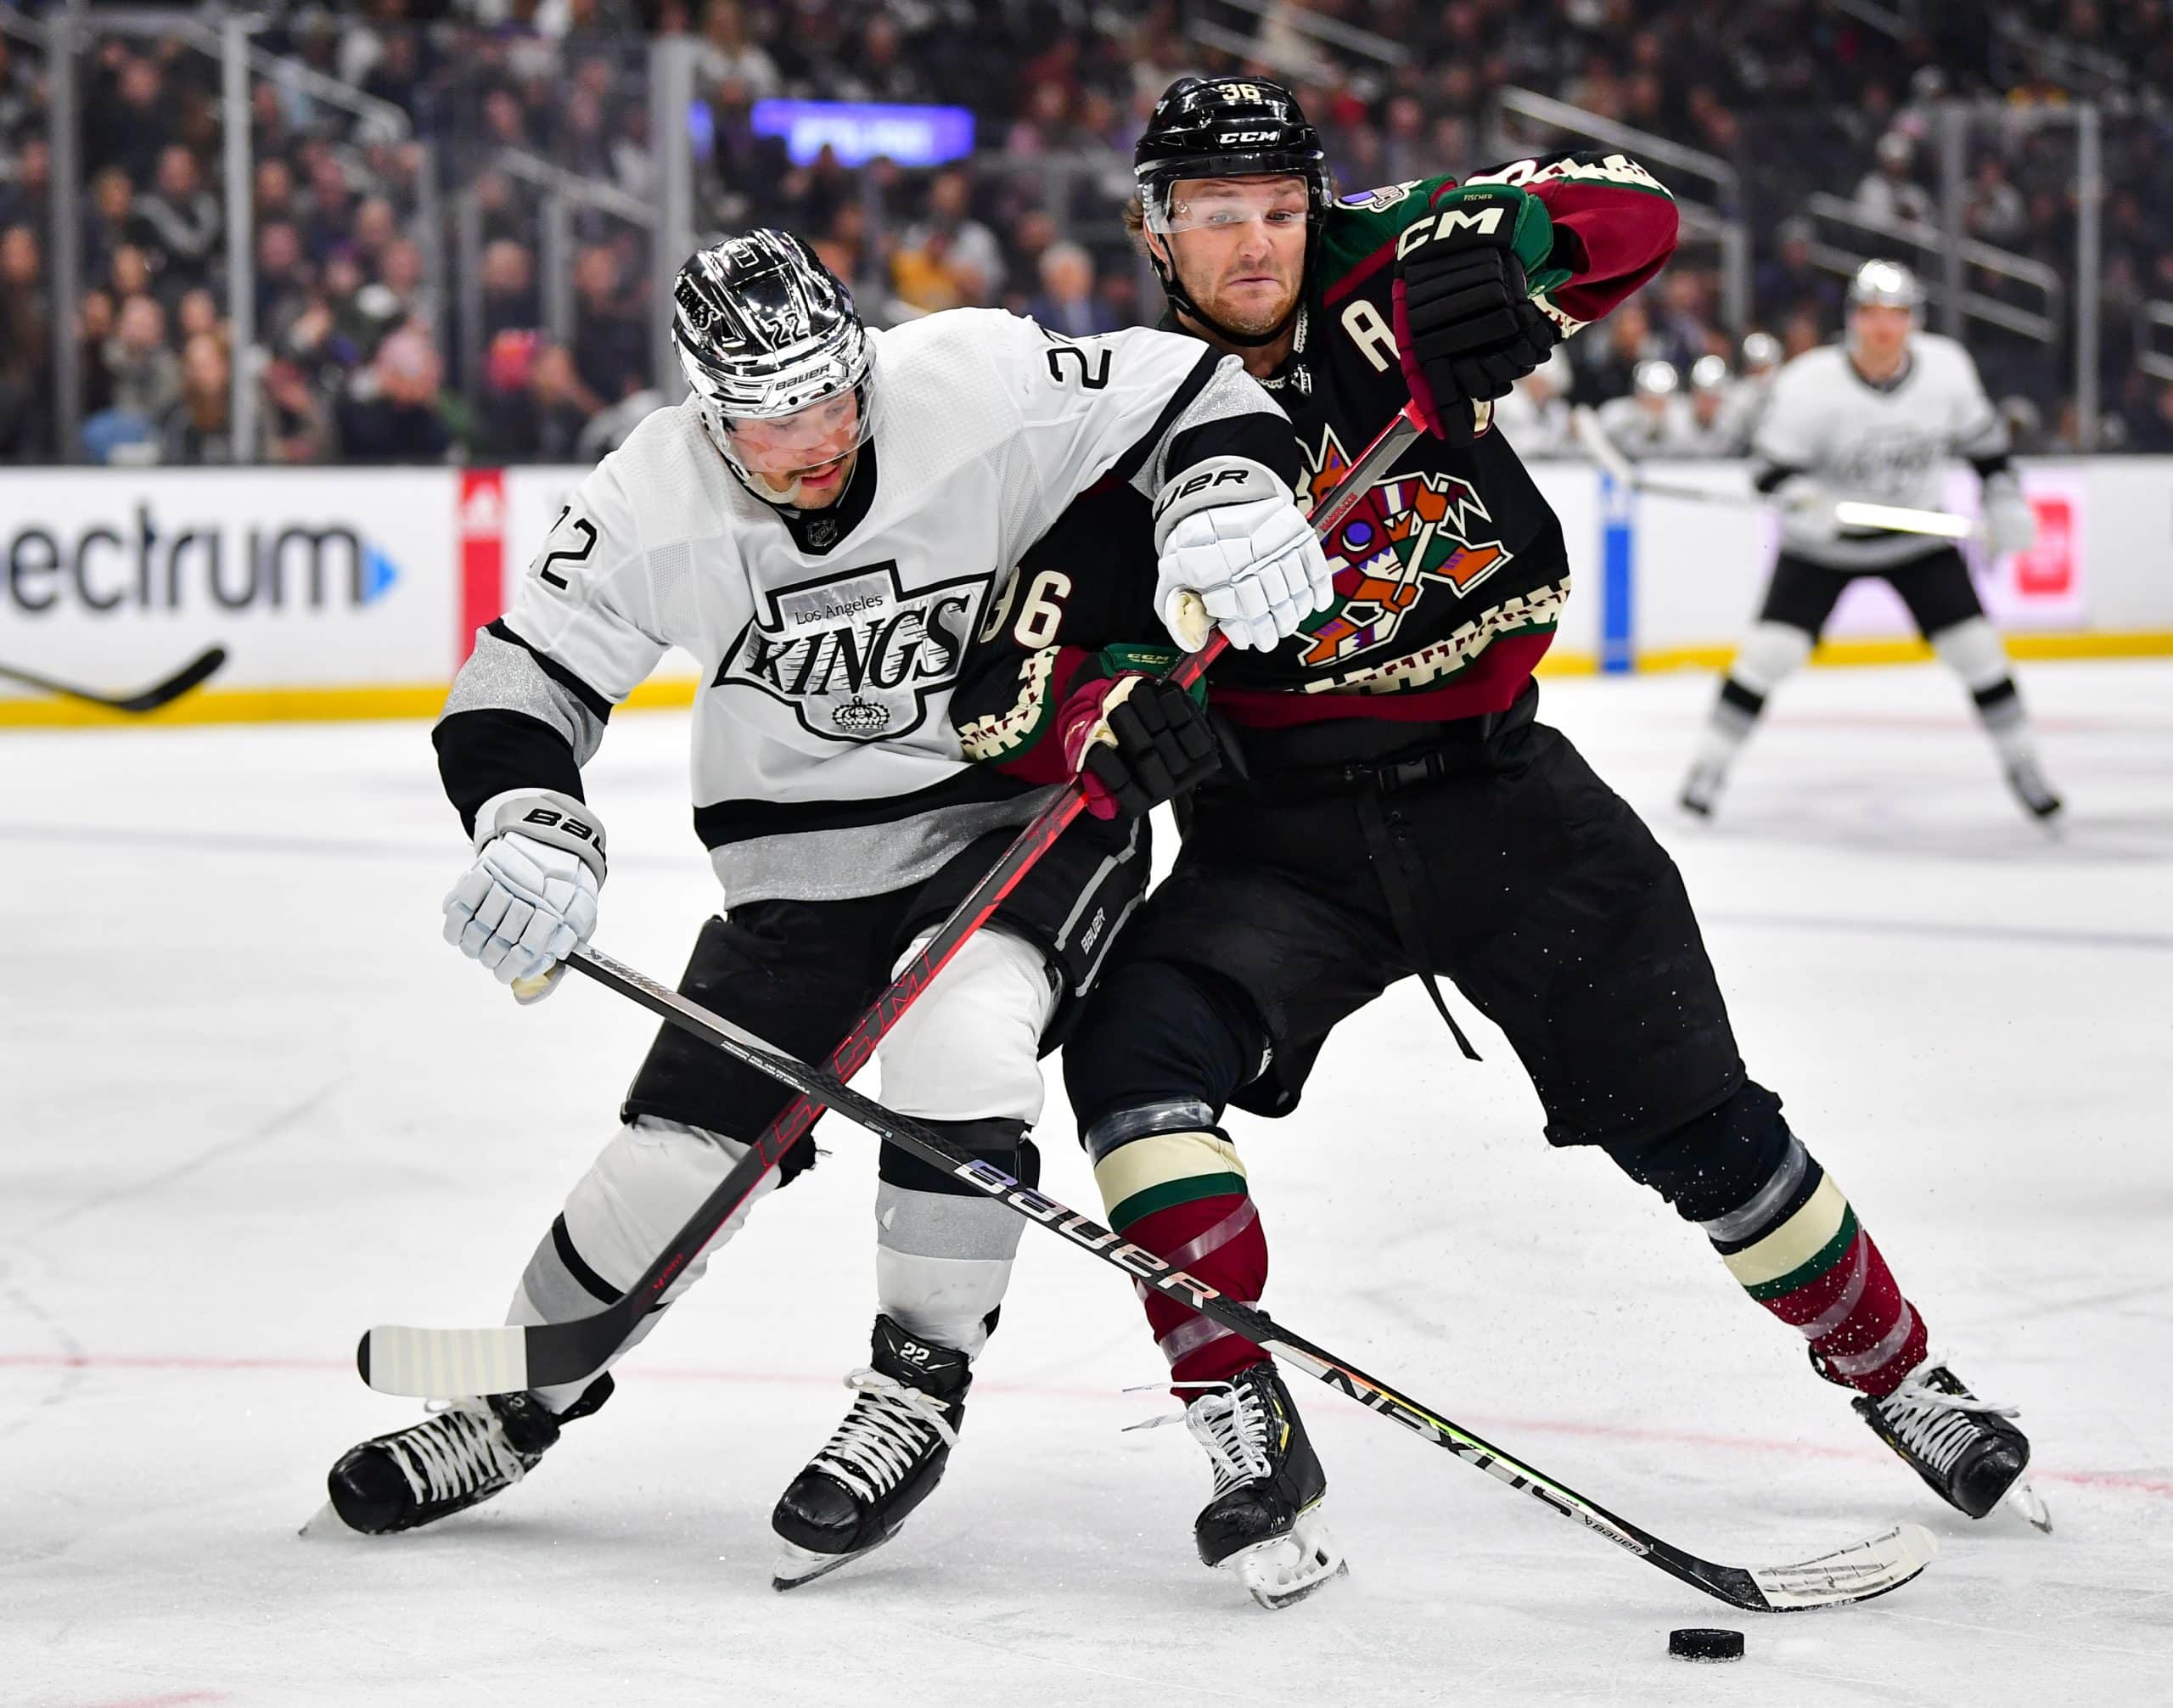 Melbourne, Australia, 24 September, 2023. Arazona Coyotes celebrate a goal  during the NHL Global Series match between The Los Angeles Kings and The  Arizona Coyotes at Rod Laver Arena on September 24